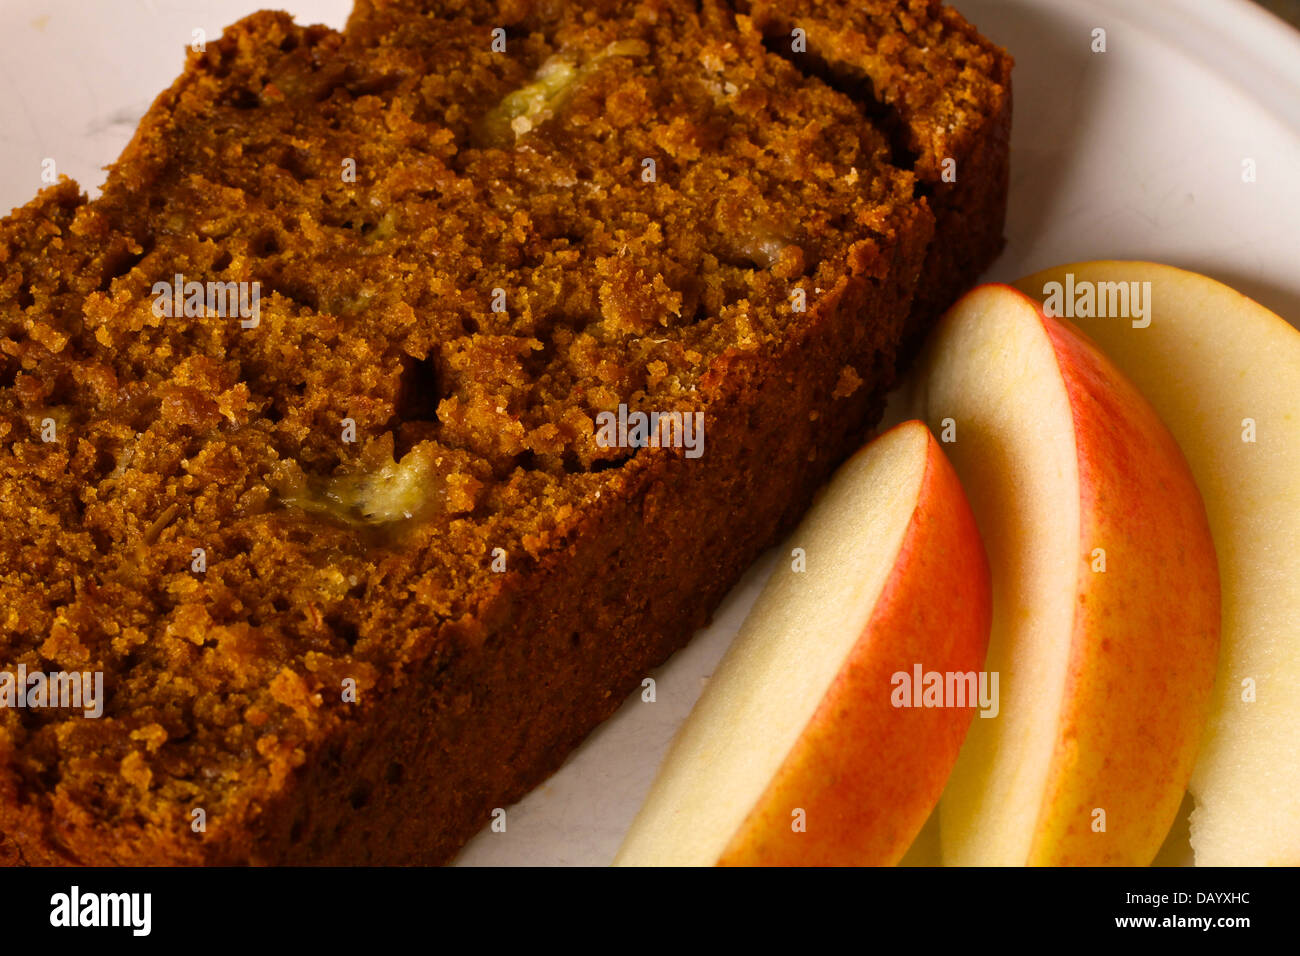 A slice of homemade banana nut bread is plated in front of a partially sliced loaf of bread, along with fresh apple slices. Stock Photo